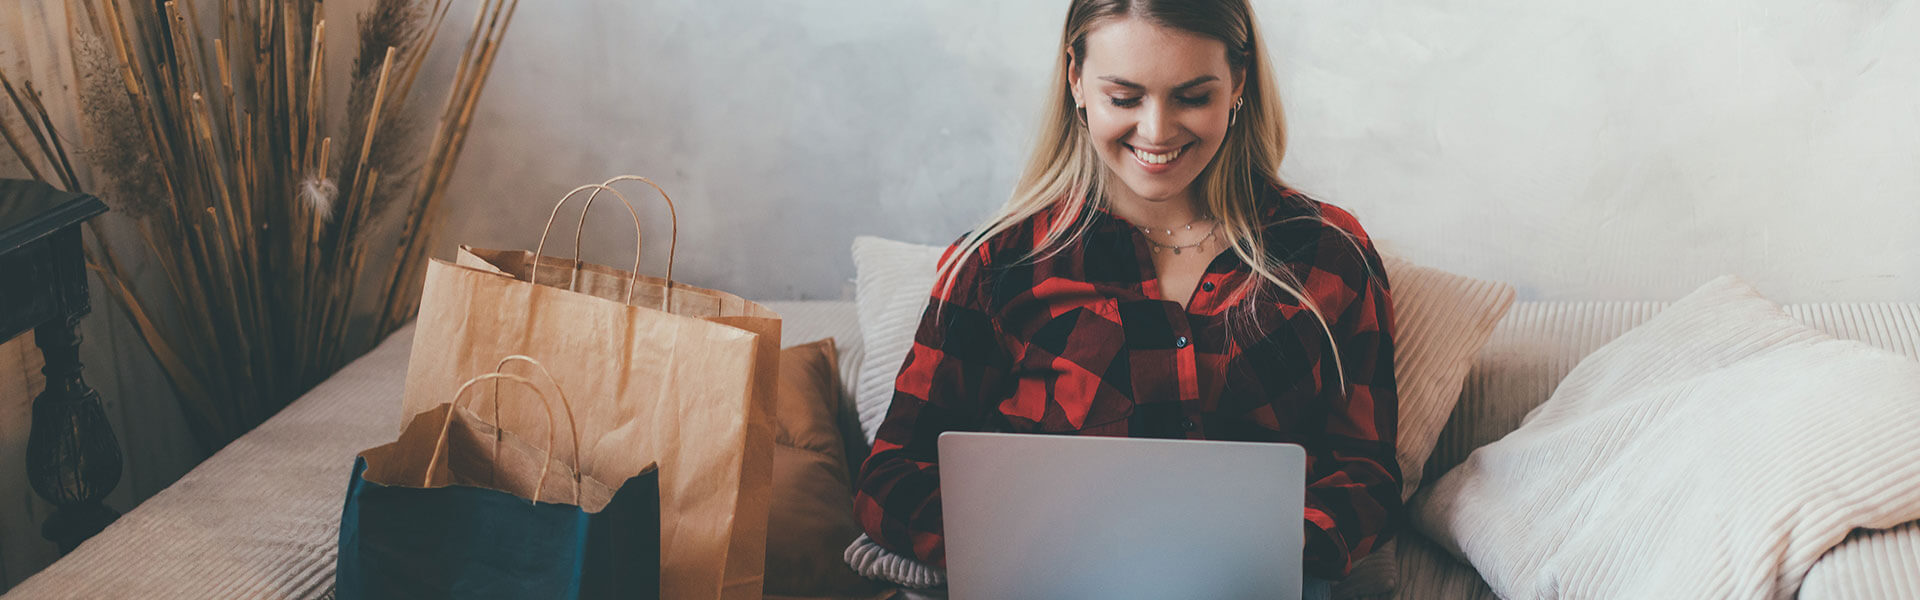 Convenience the No.1 reason for purchasing online